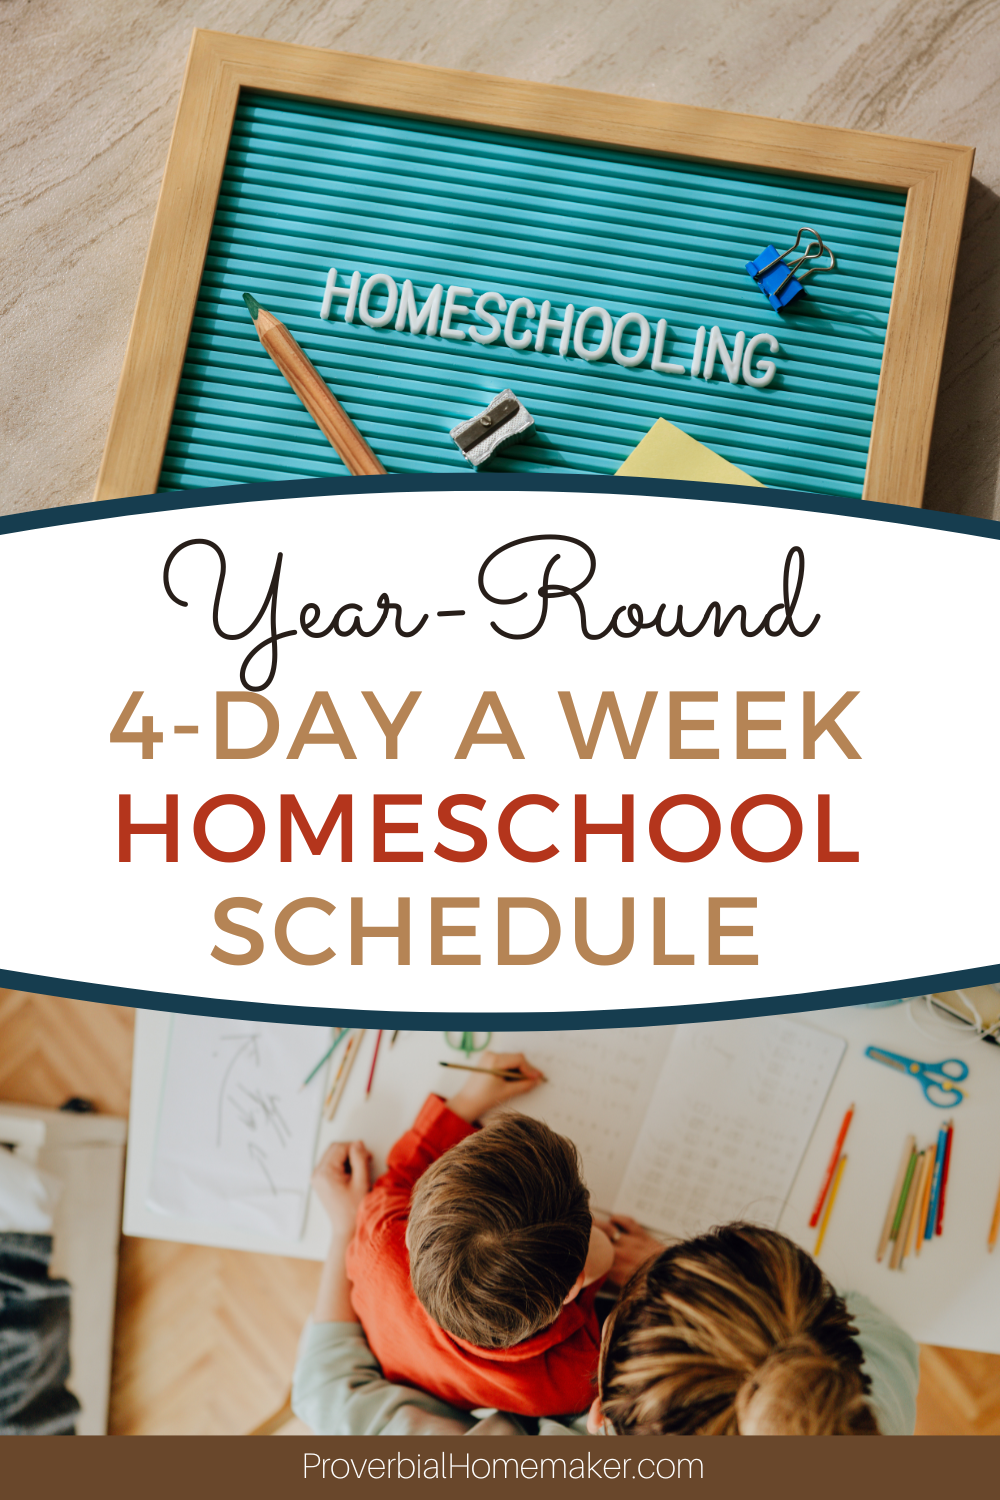 Example year-round homeschool schedule using just 4 days a week! Try a flexible and productive plan for your daily homeschool routine.